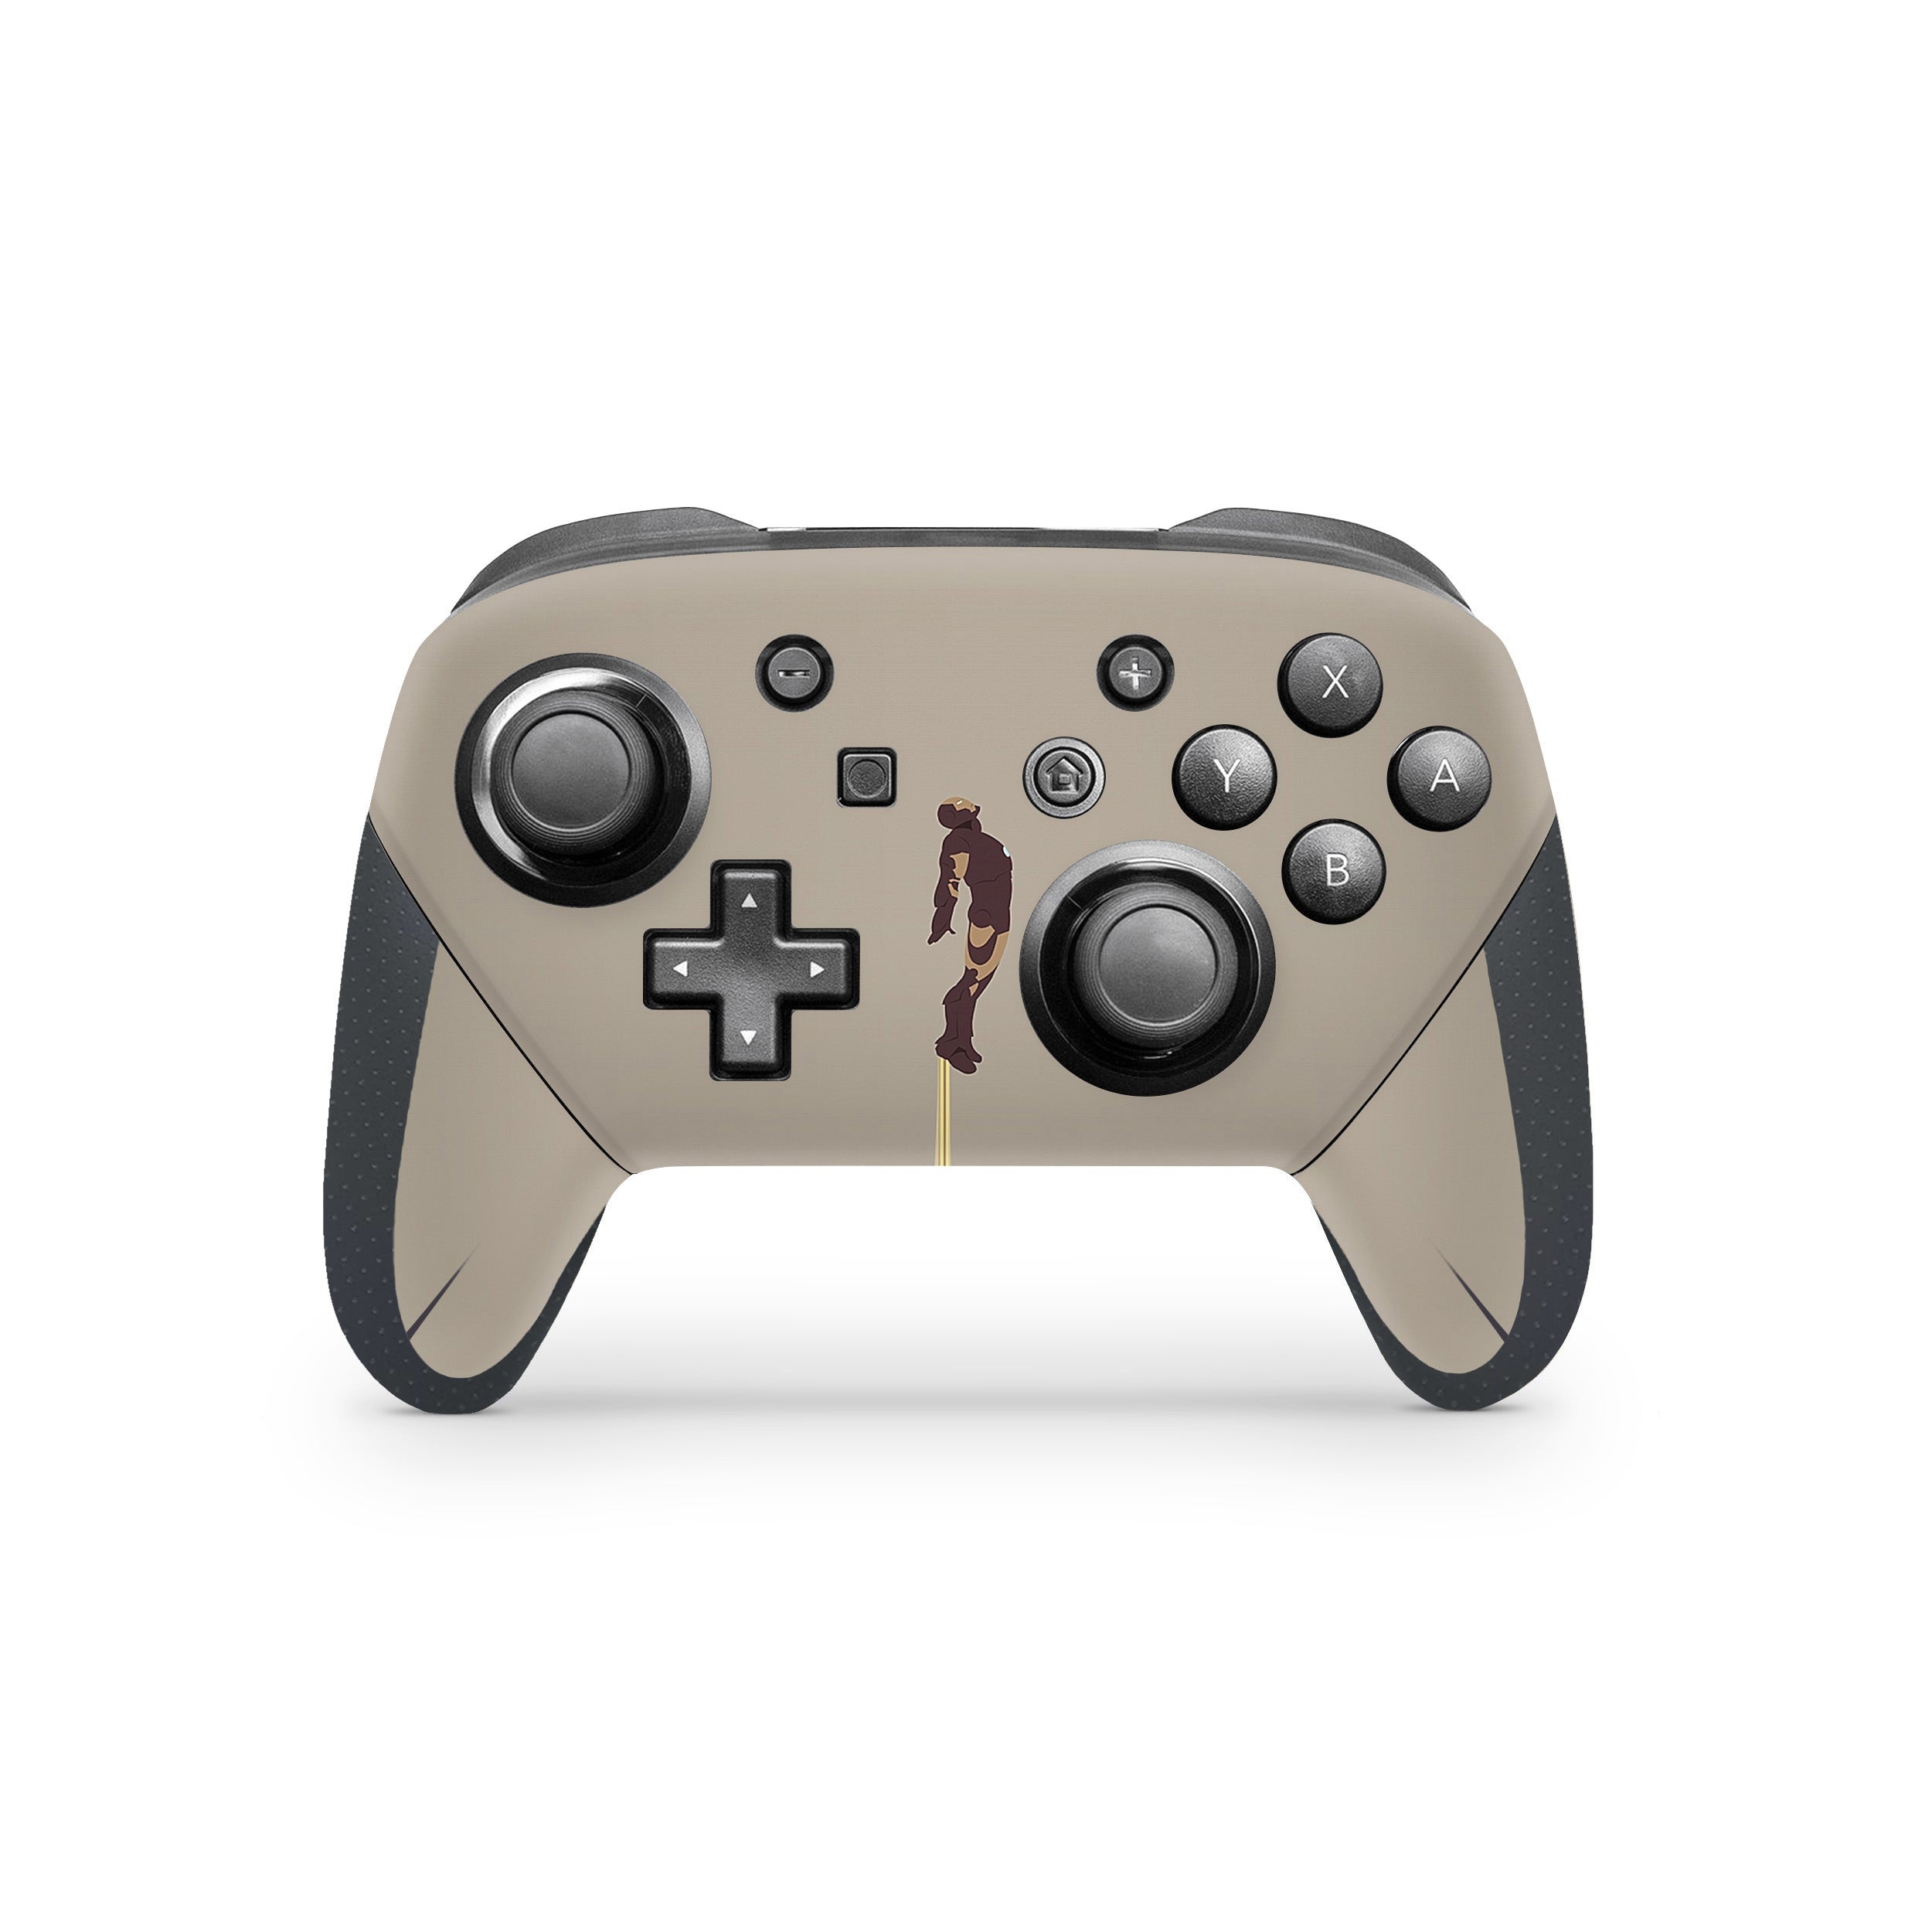 A video game skin featuring a Marvel Iron Man design for the Switch Pro Controller.